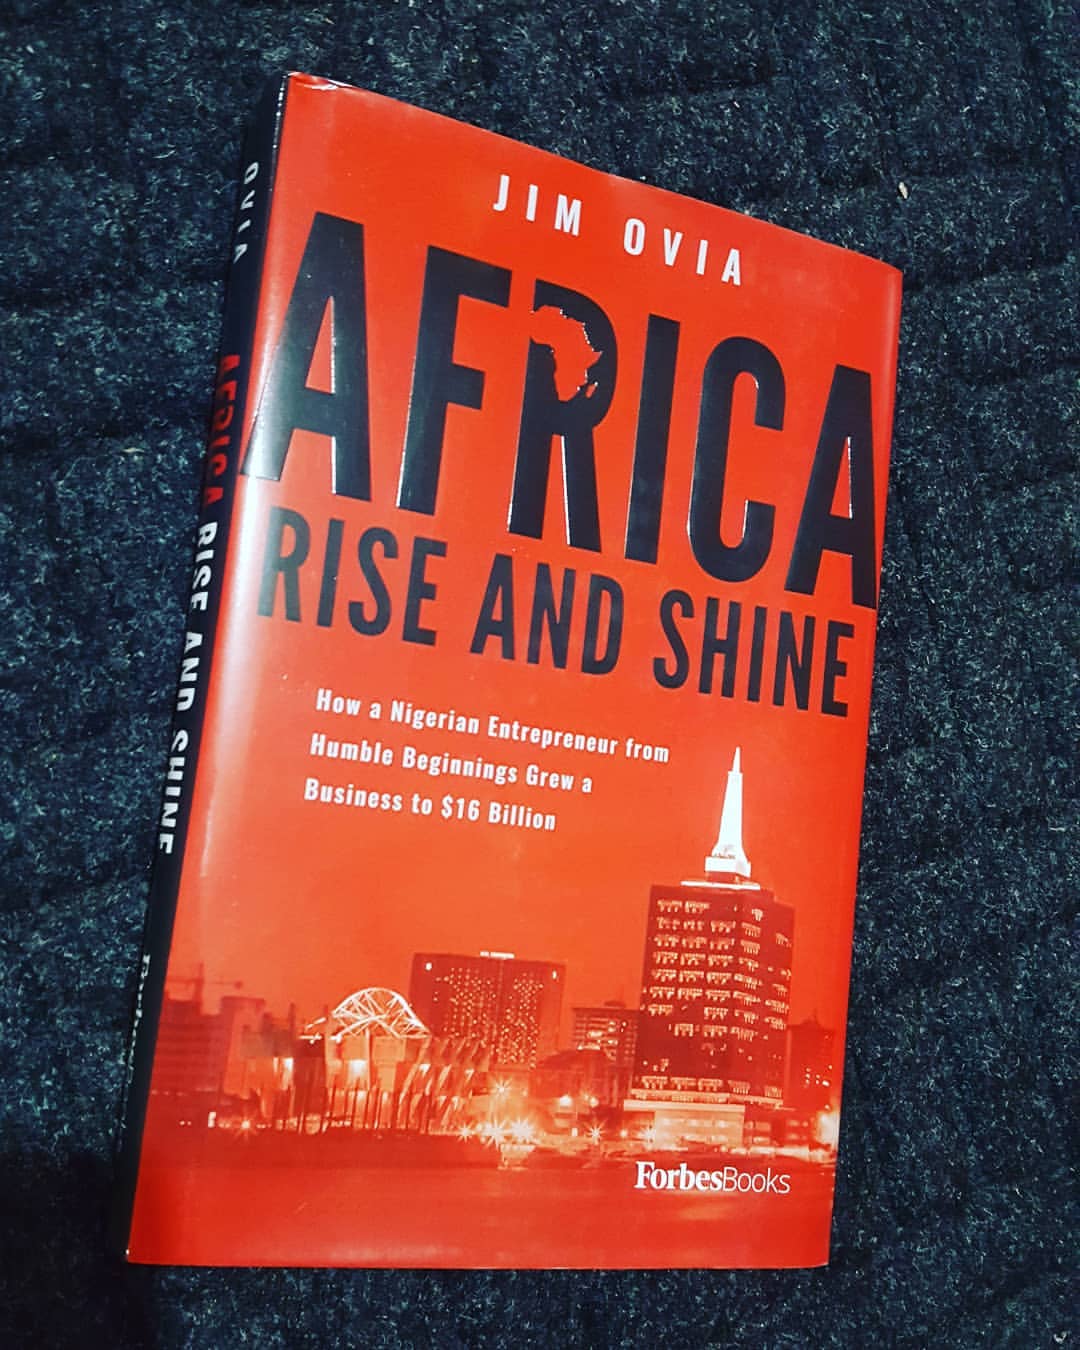 Africa Rise And Shine: How a Nigerian Entrepreneur from Humble Beginnings Grew a Business to $16 Billion – By Jim Ovia